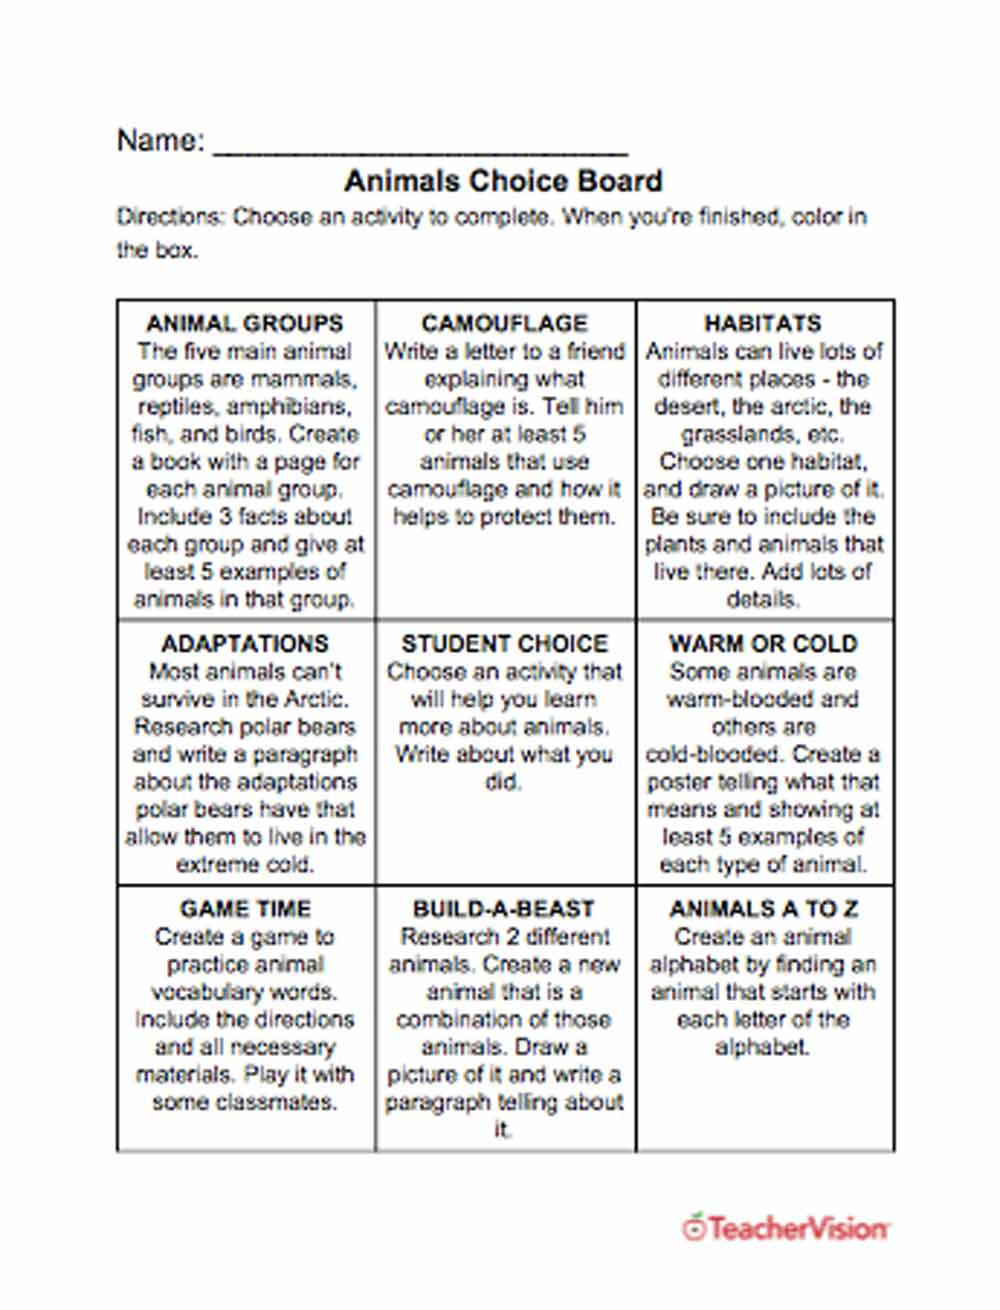 Animals Printables, Lessons, And Activities: Grades K-12 - Teachervision | Free Printable Worksheets Animal Adaptations